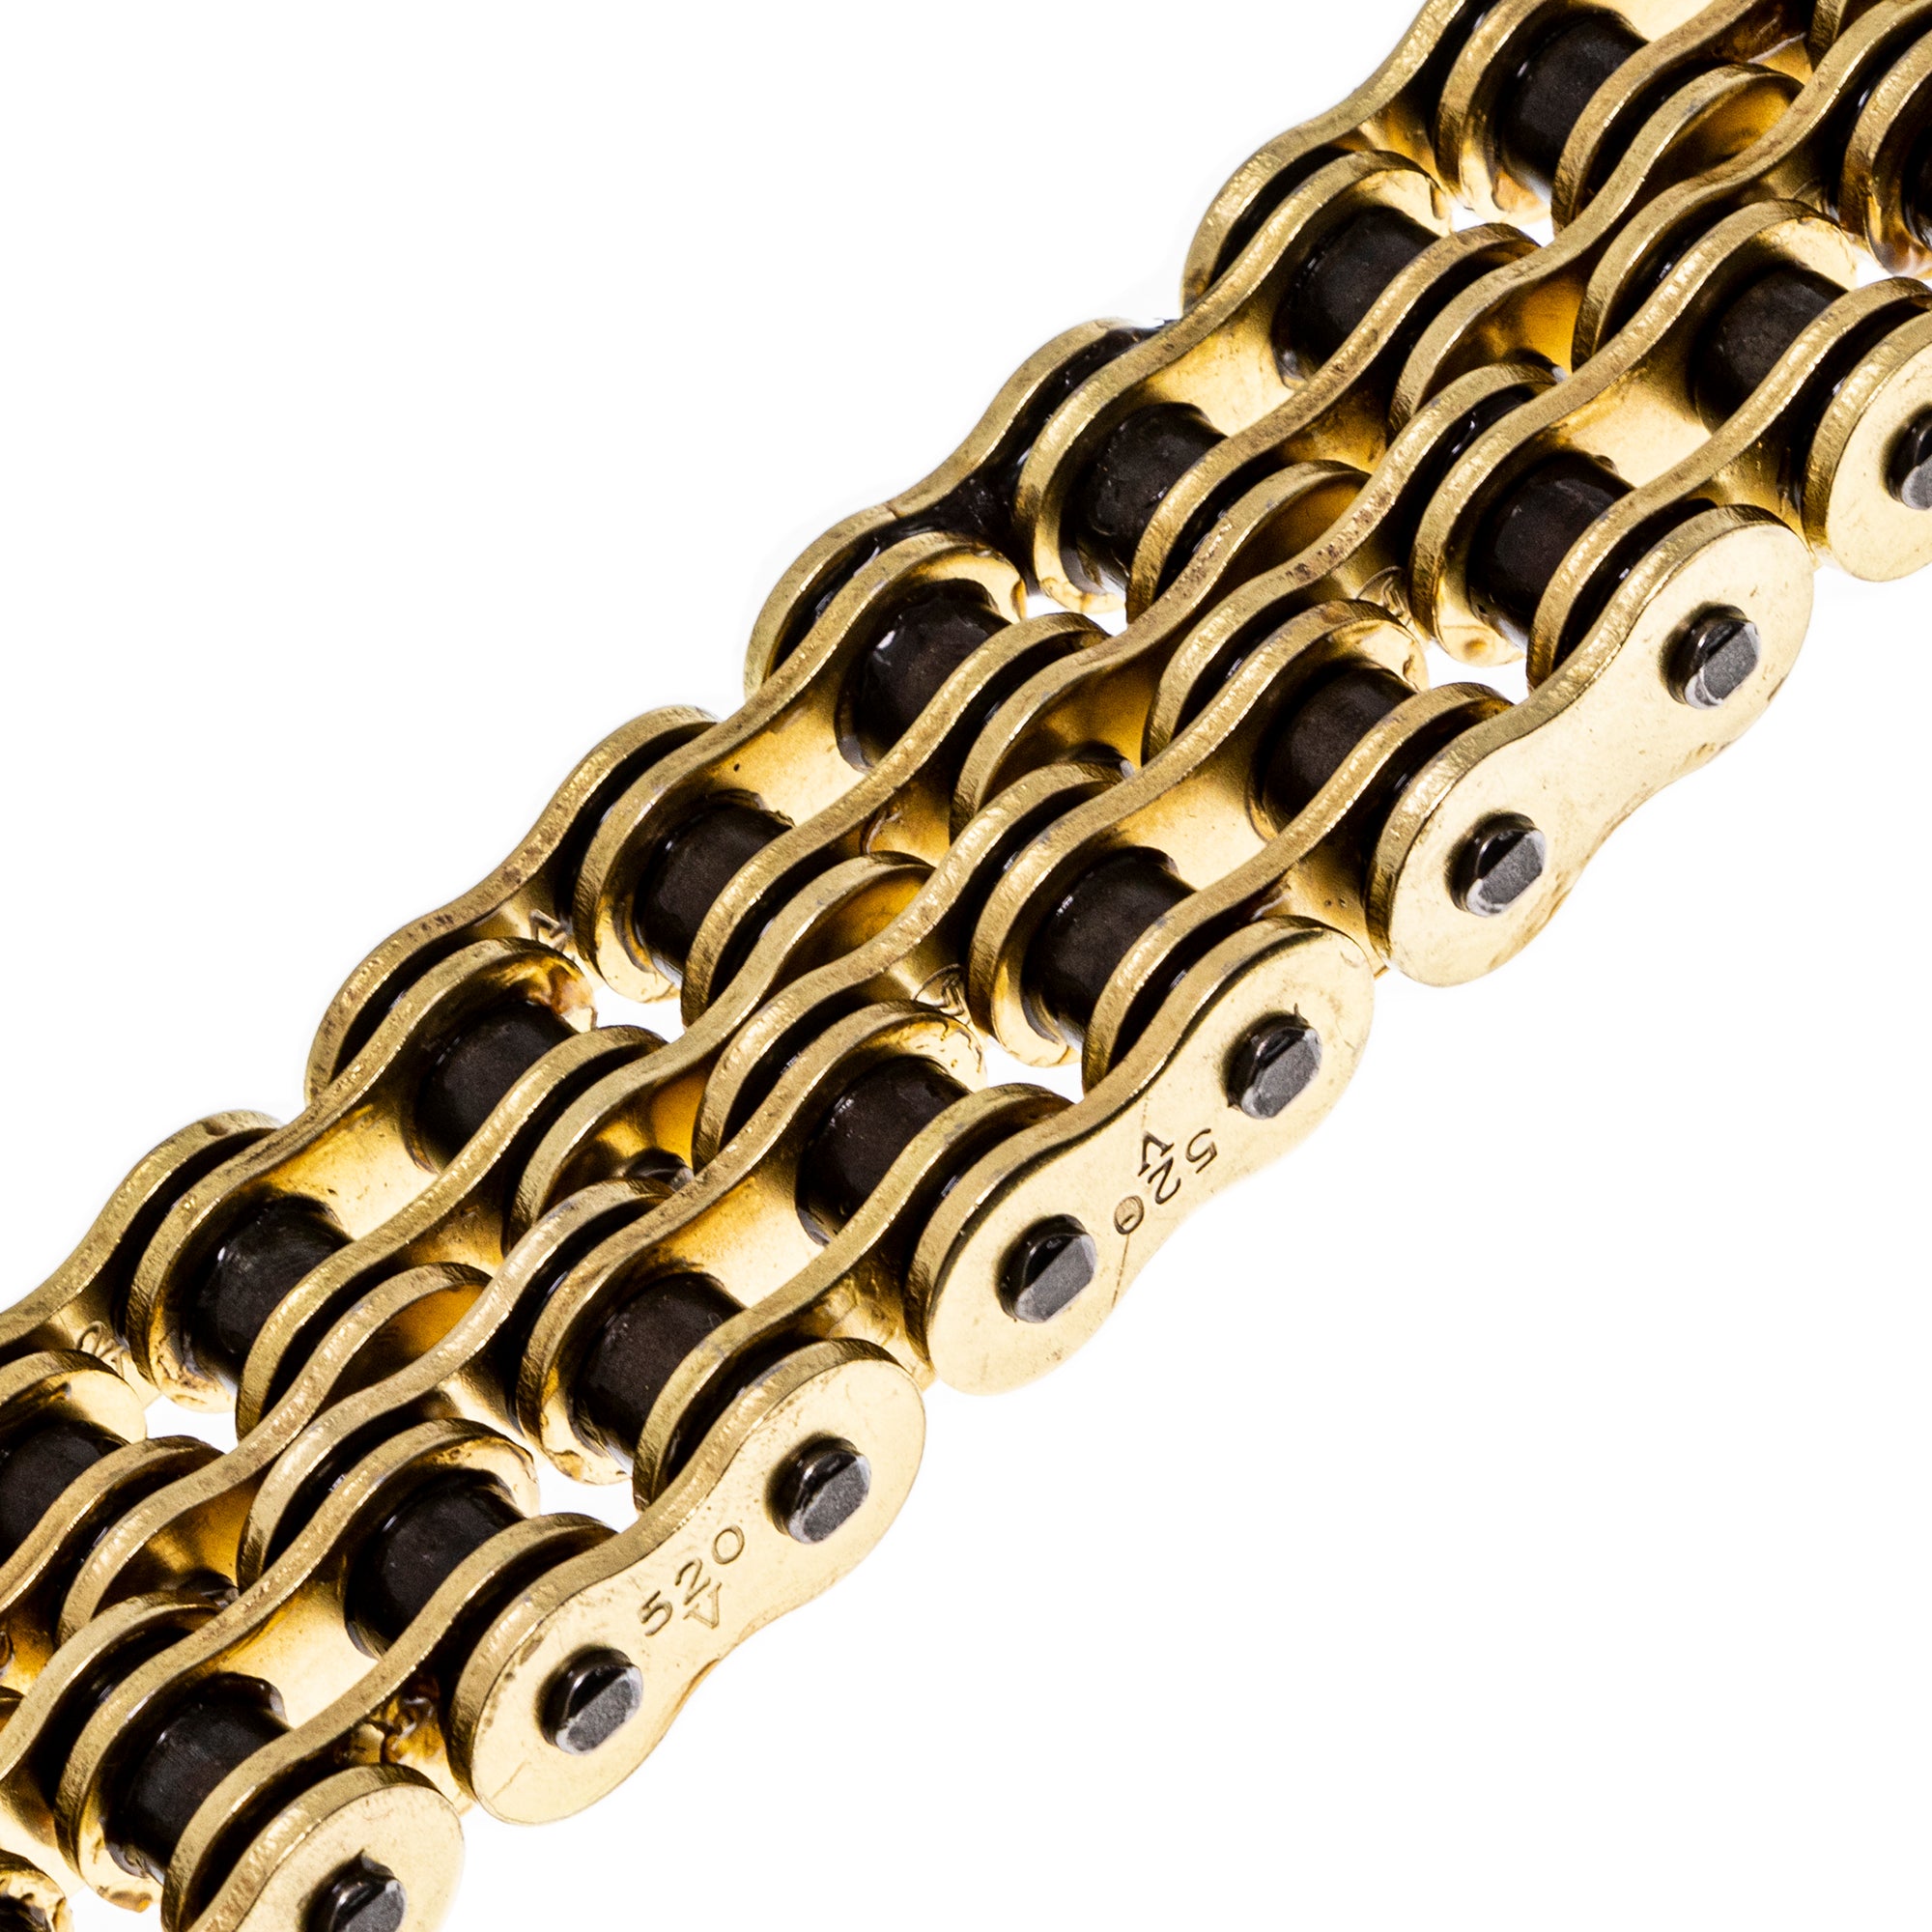 Gold X-Ring Chain 118 w/ Master Link for zOTHER Yamaha KTM 525 520 505 500 78010167118 NICHE 519-CDC2401H